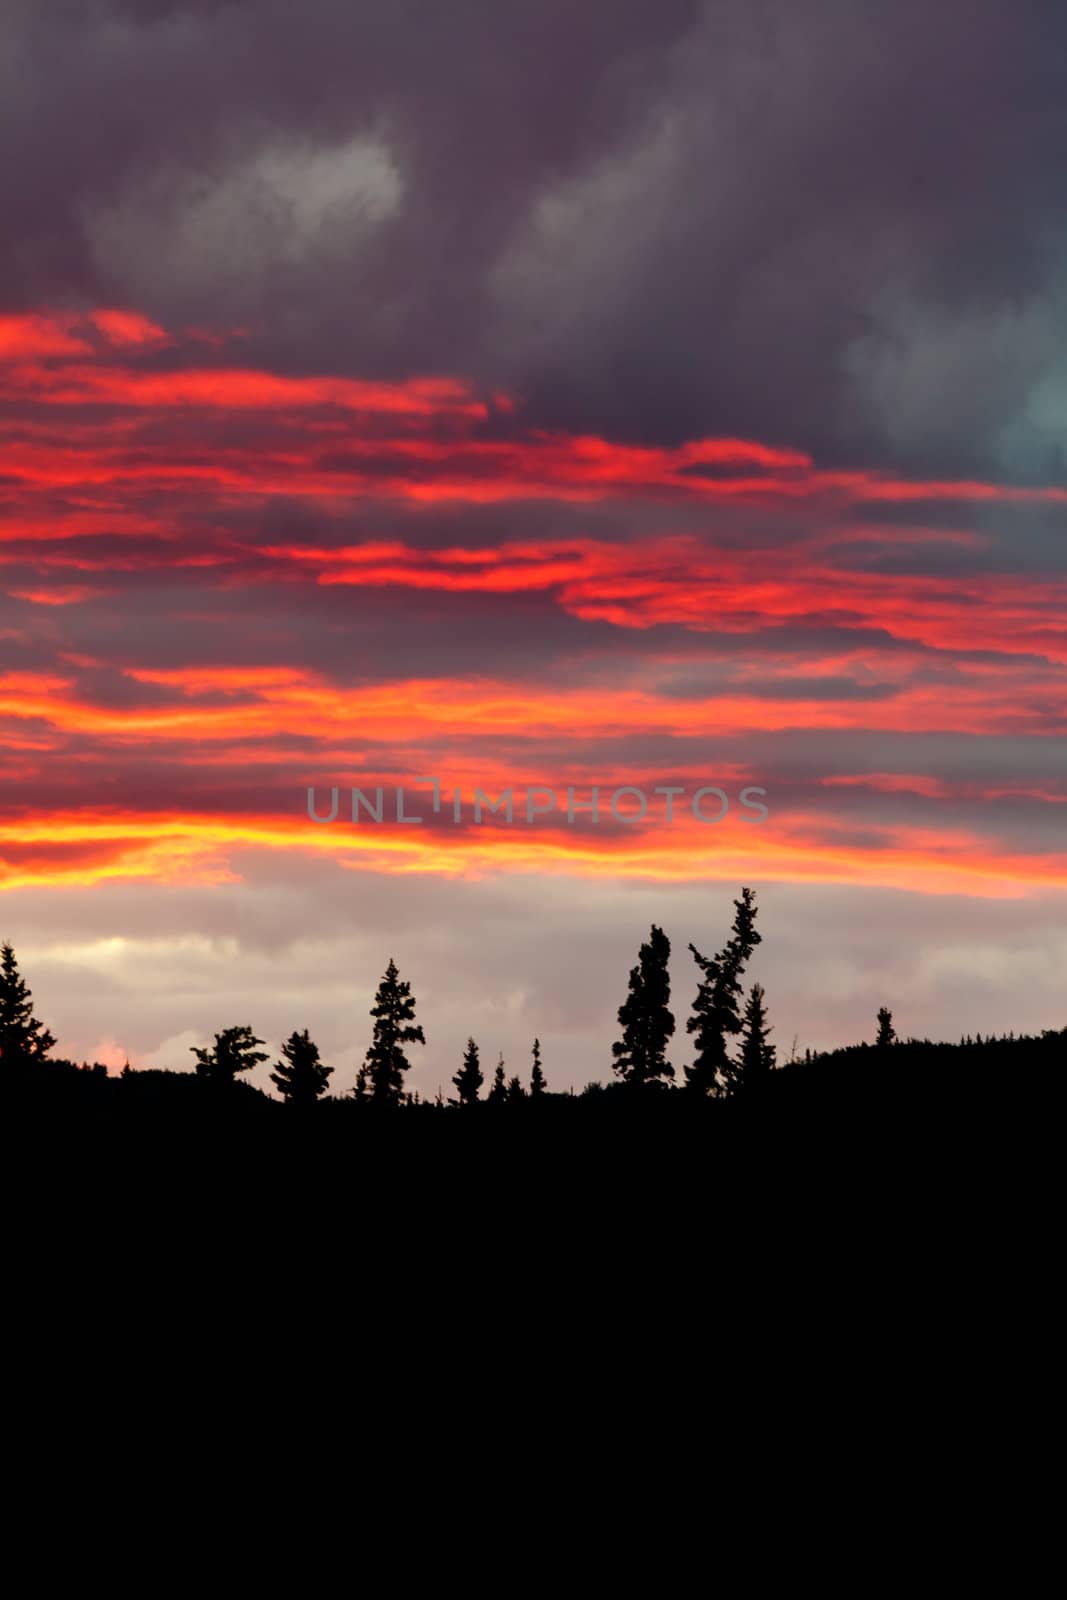 Cloudy sunset sky on fire over silhouette of forested hills.